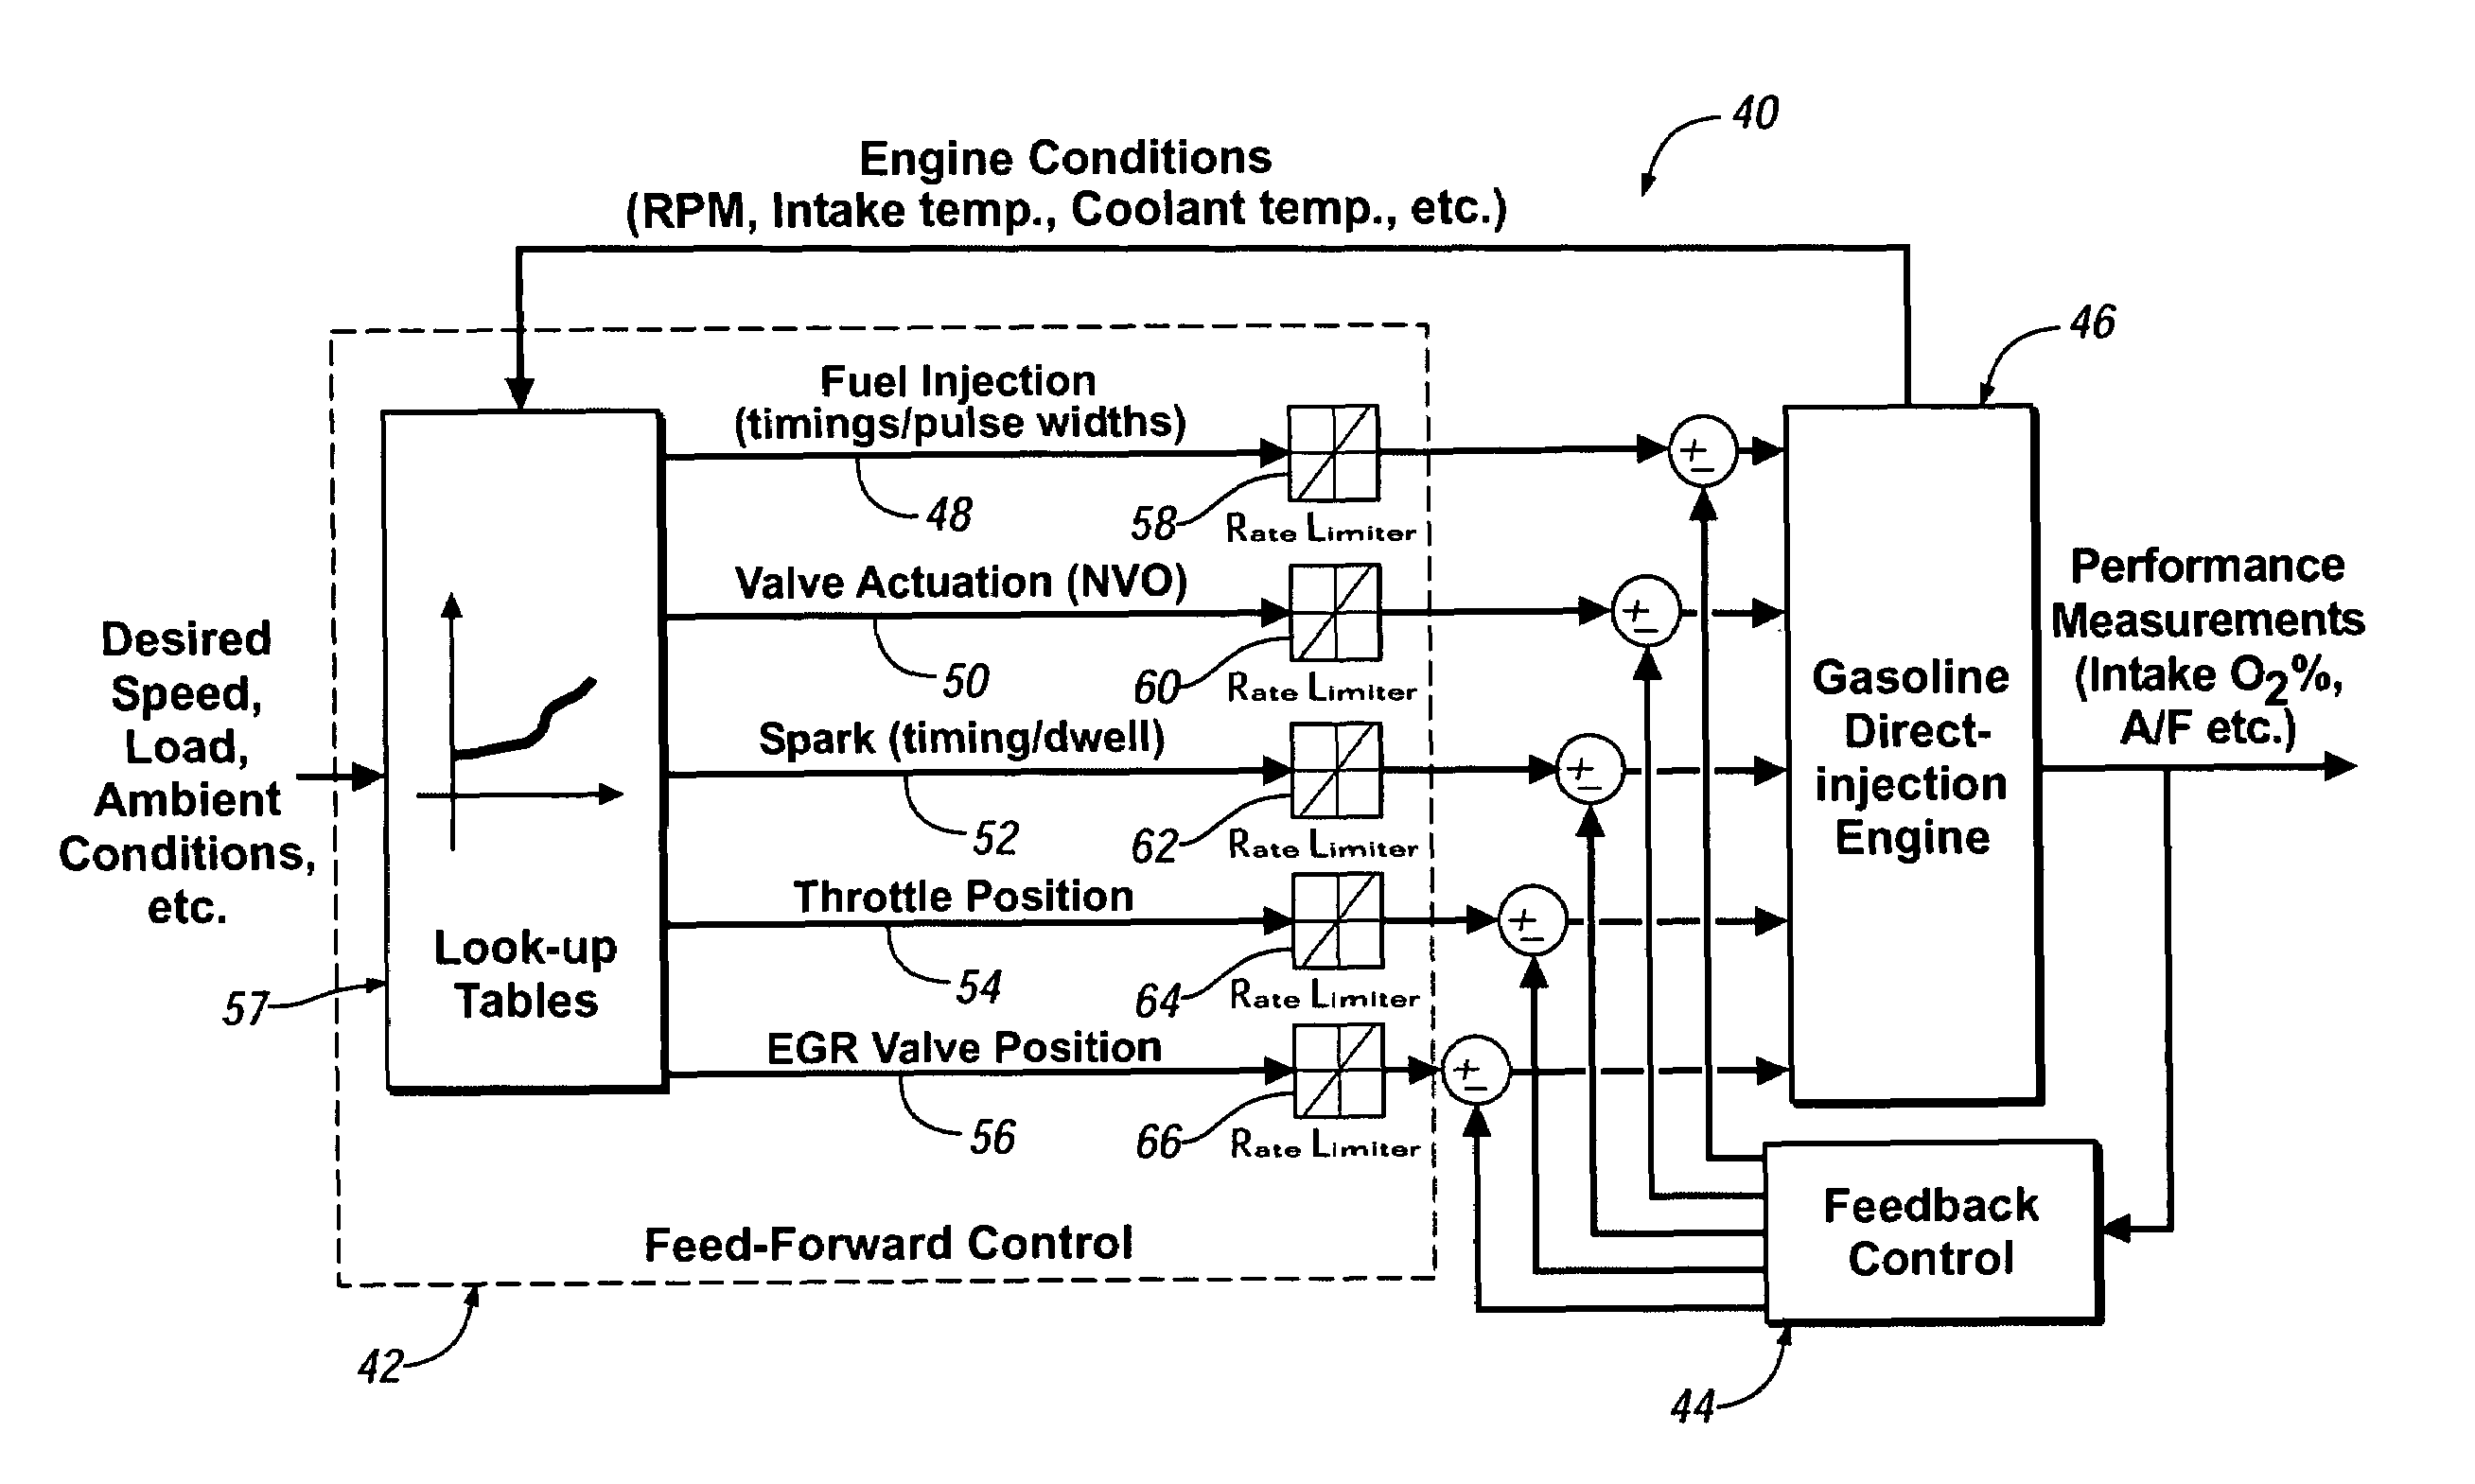 Speed transient control methods for direct-injection engines with controlled auto-ignition combustion